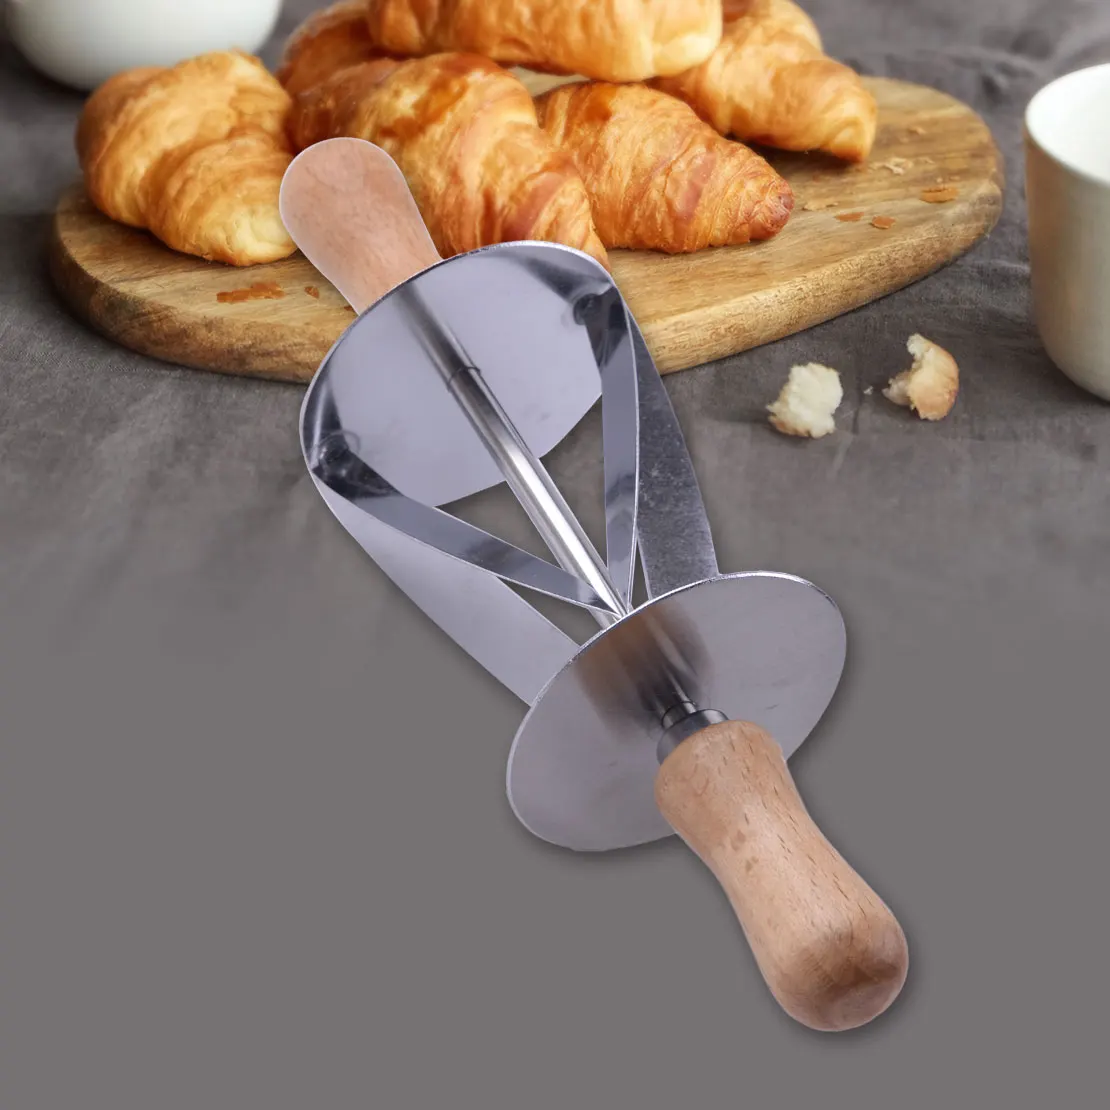 

LETAOSK 304 Stainless Steel 6x19.7cm Croissant Rolling Pin Pastry Dough Roller Cutter Bread Slicer Baking DIY Tool